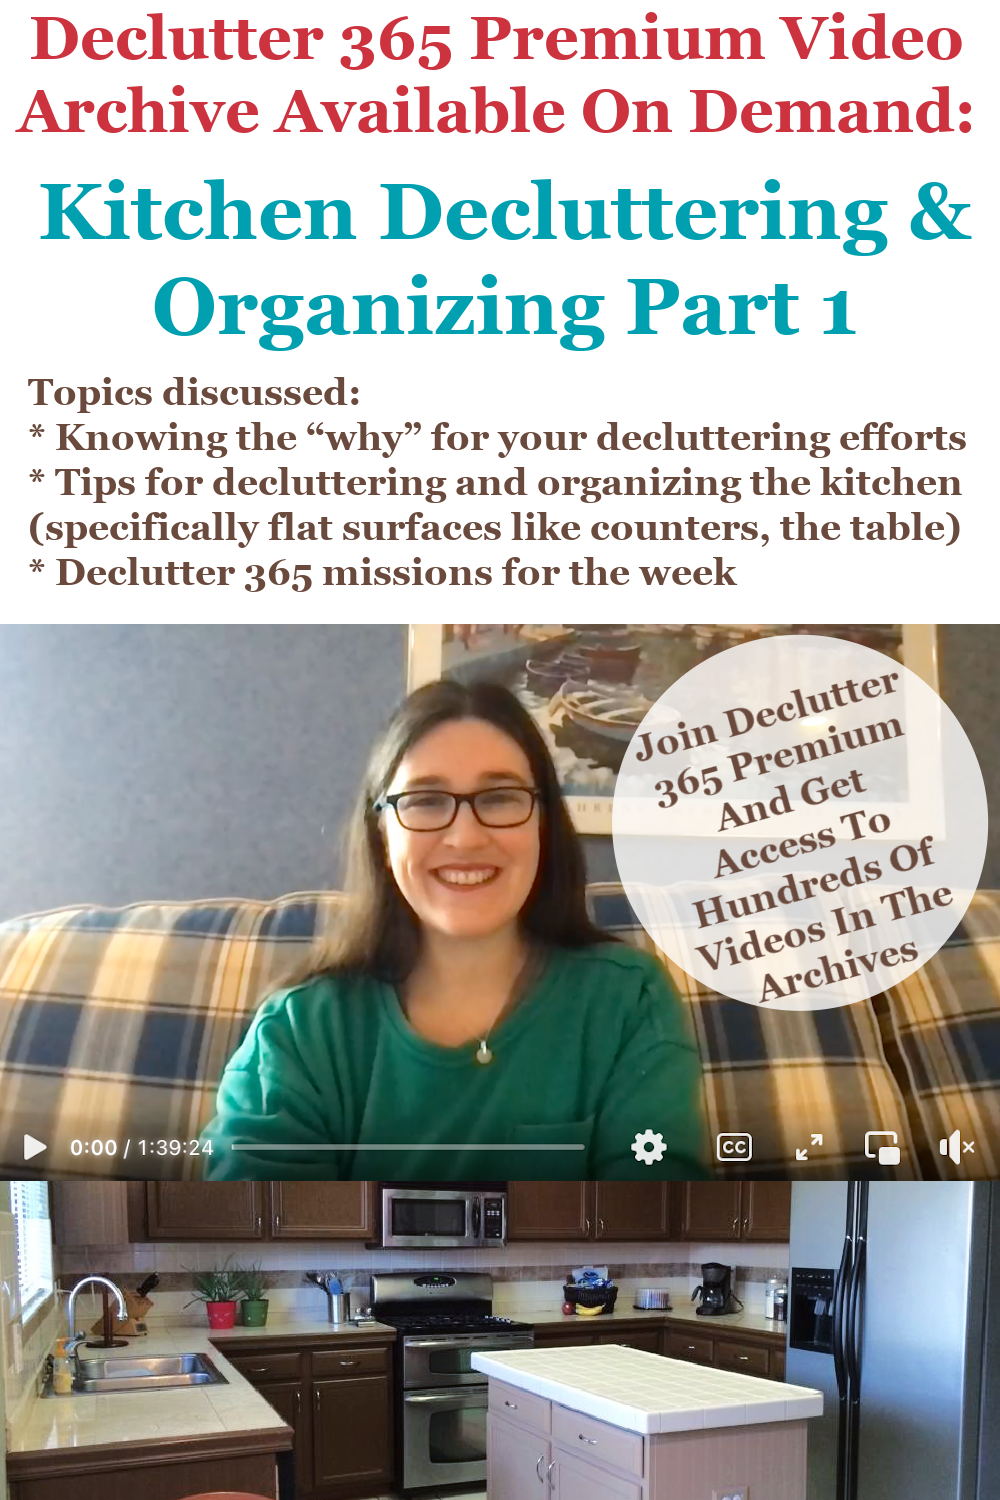 Declutter 365 Premium video archive available on demand all about kitchen decluttering and organizing, part 1, on Home Storage Solutions 101